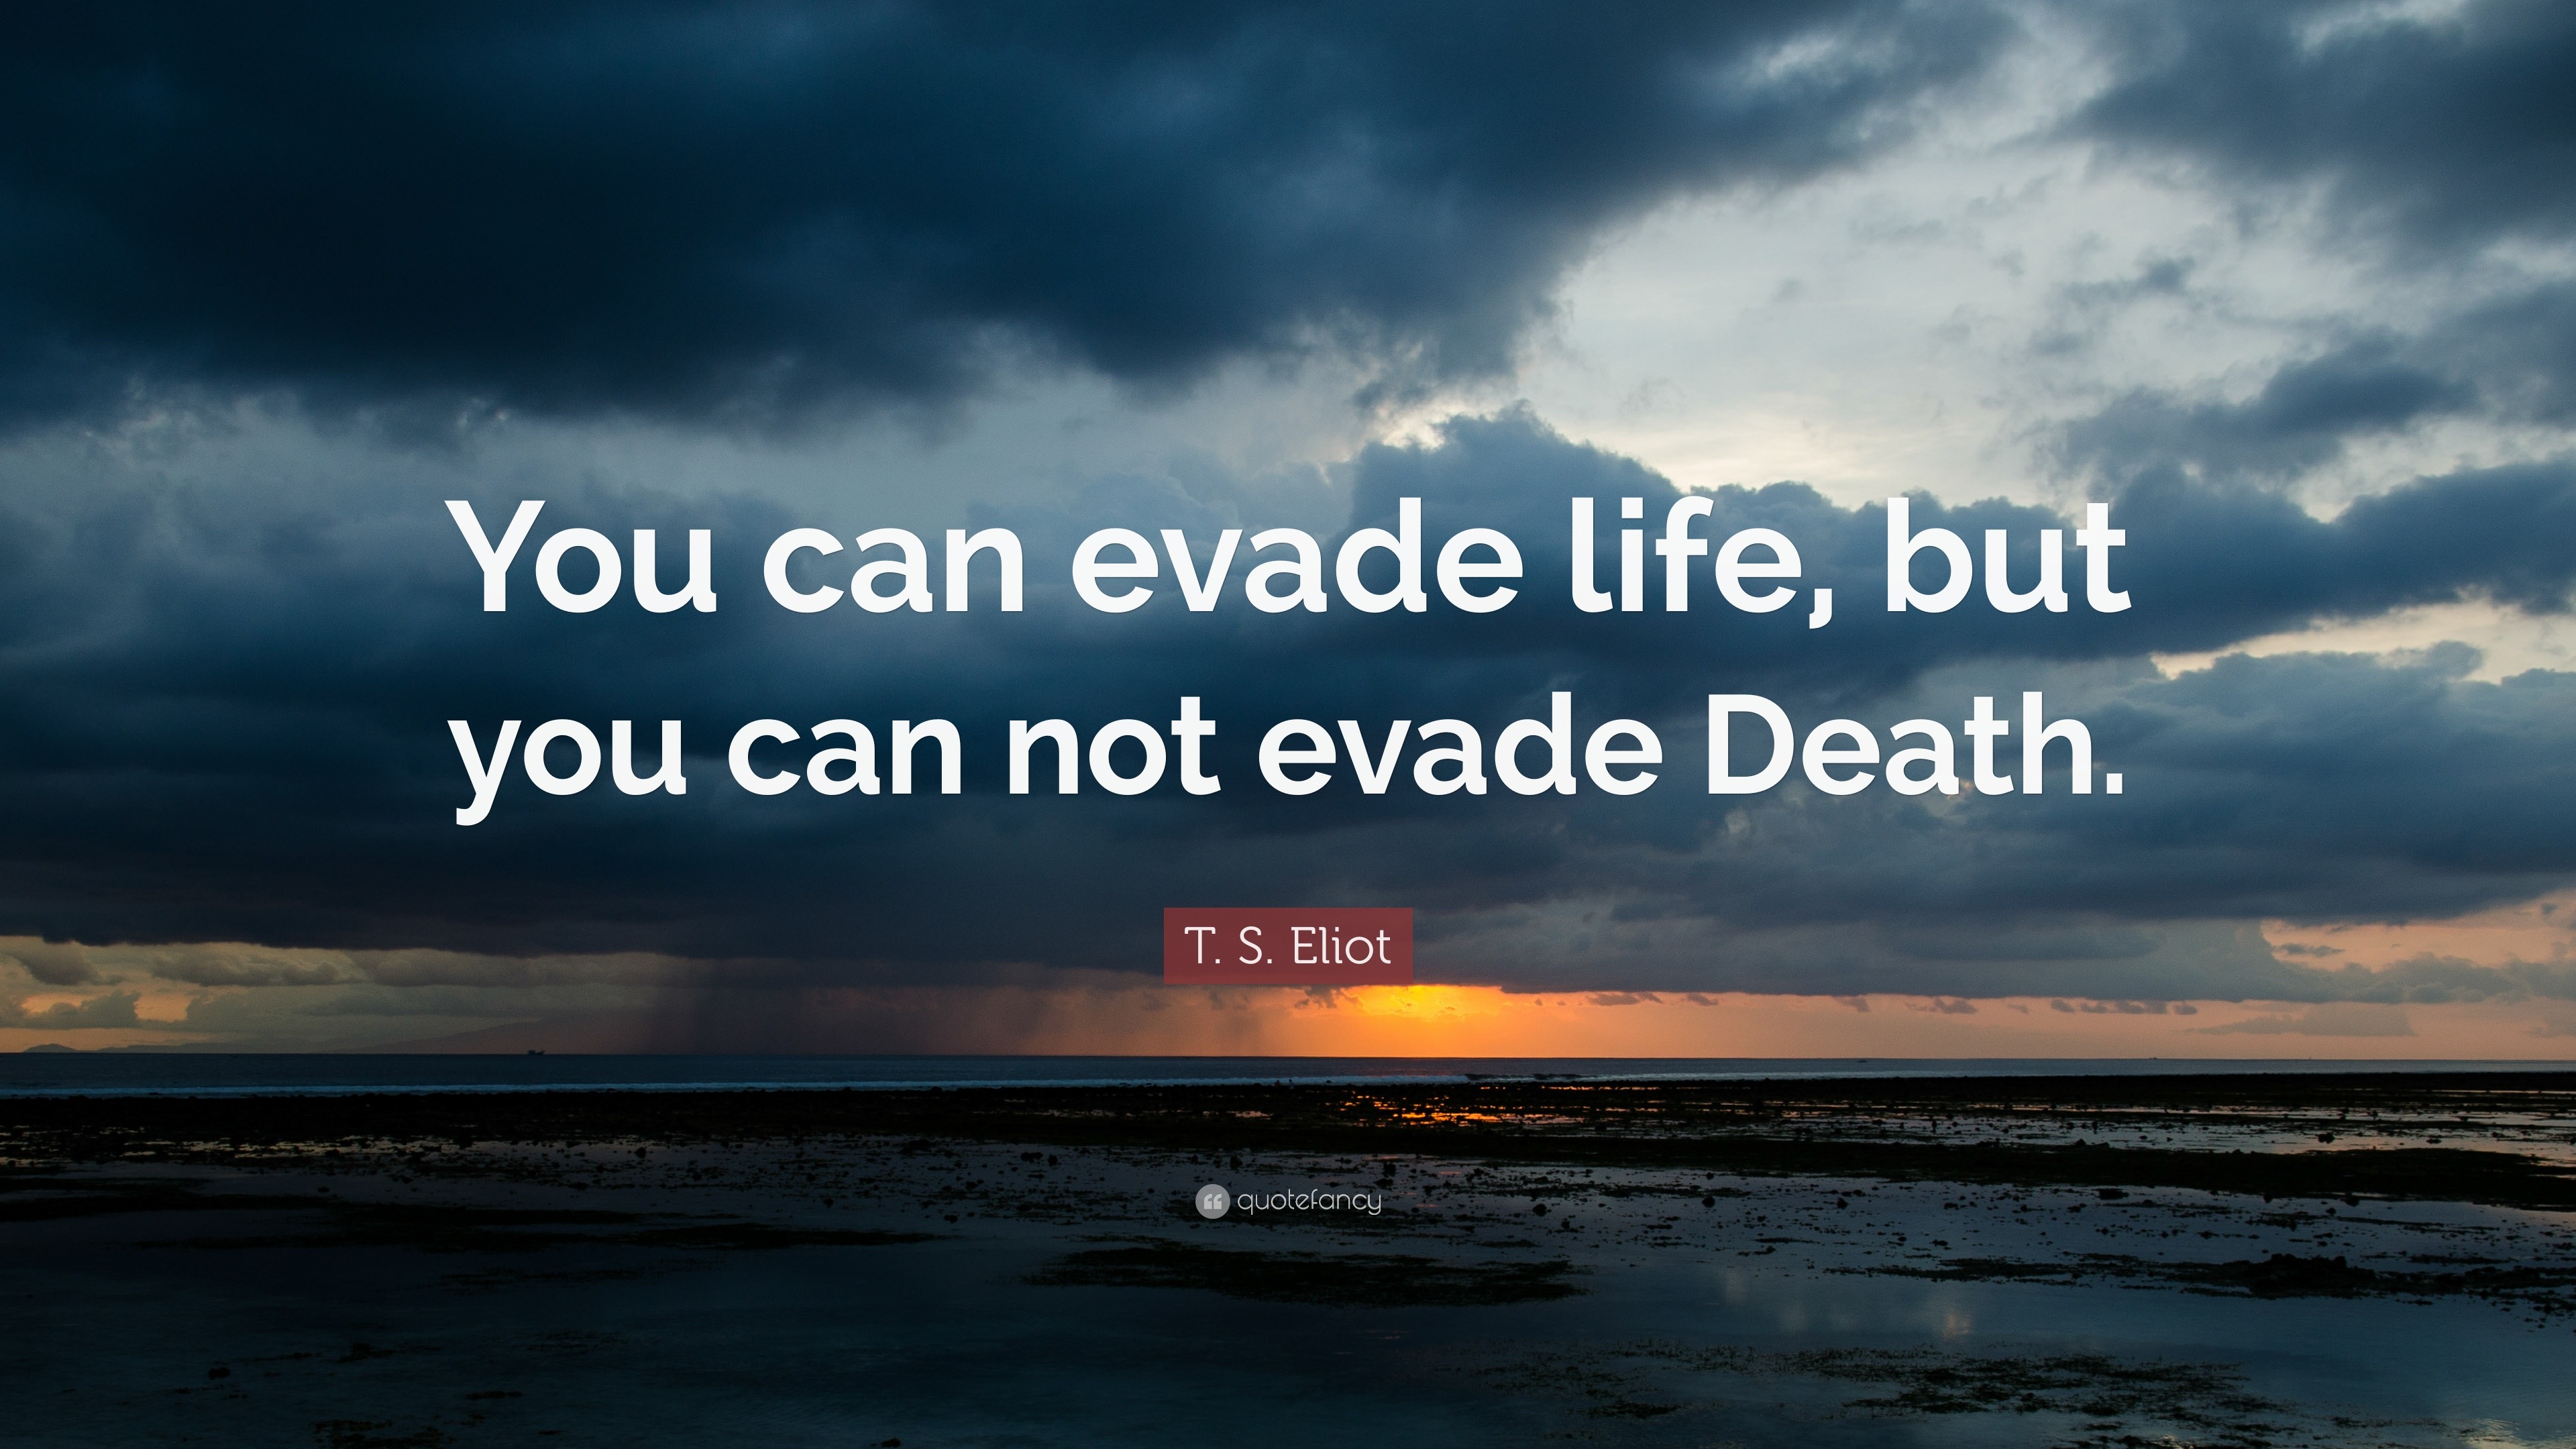 T. S. Eliot Quote: “You can evade life, but you can not evade Death.”